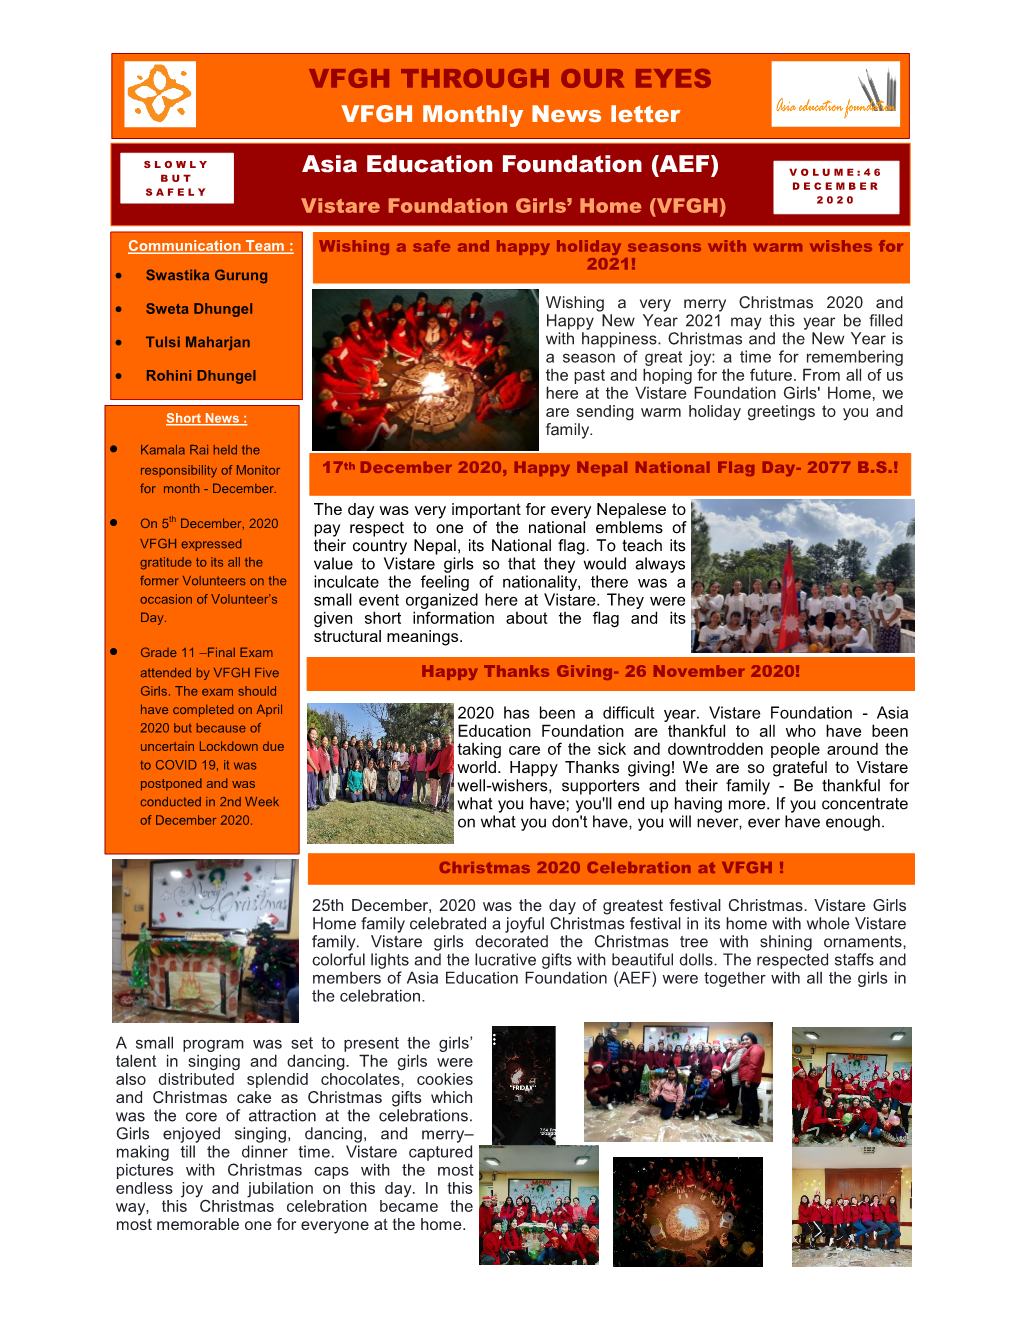 VFGH THROUGH OUR EYES VFGH Monthly News Letter